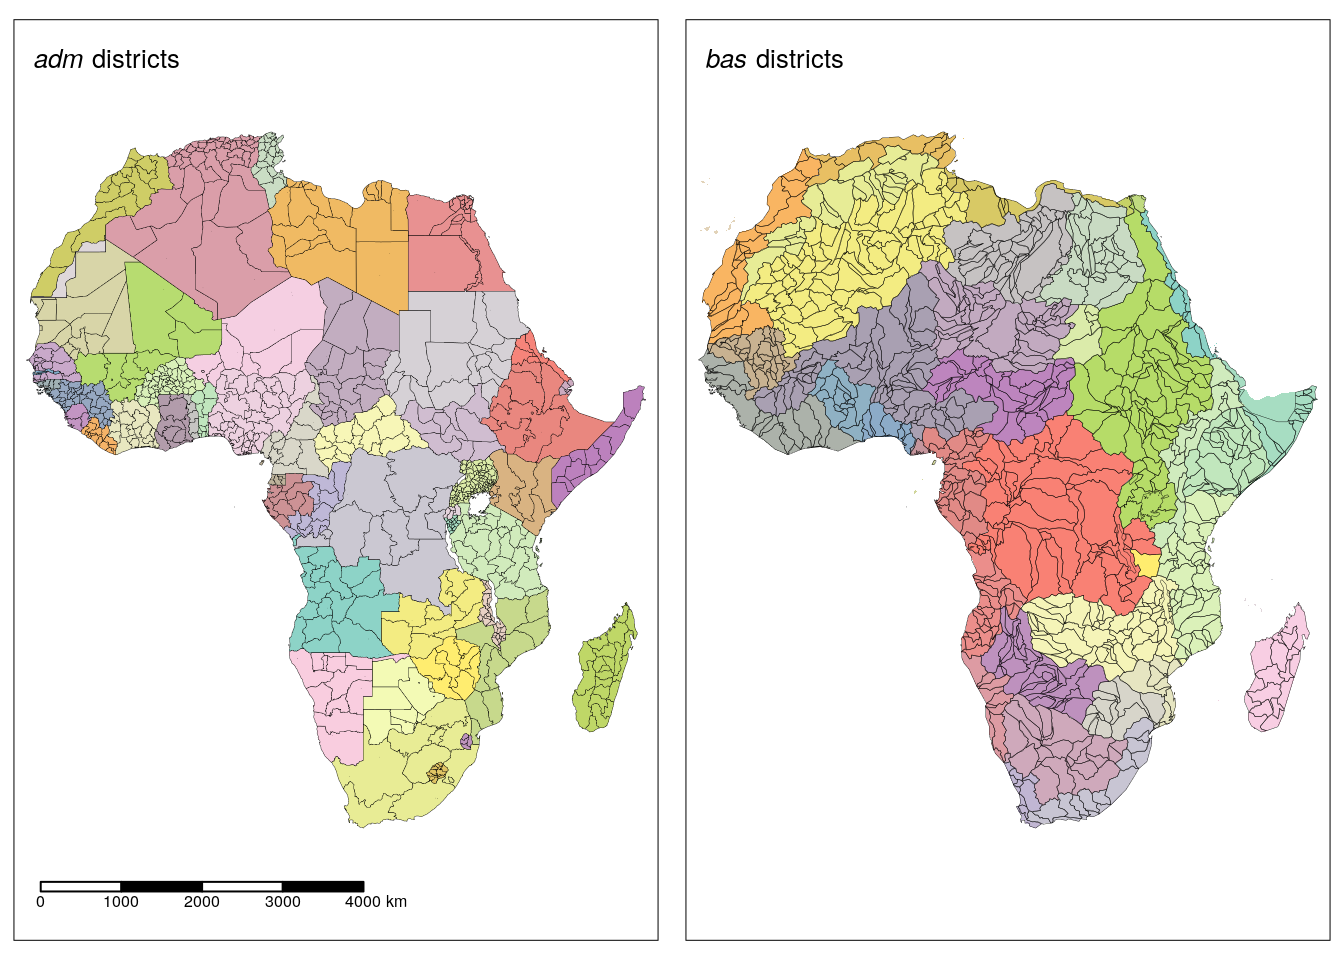 Overview of the administrative (left) and sub-basin districts (right) used for data aggregation.